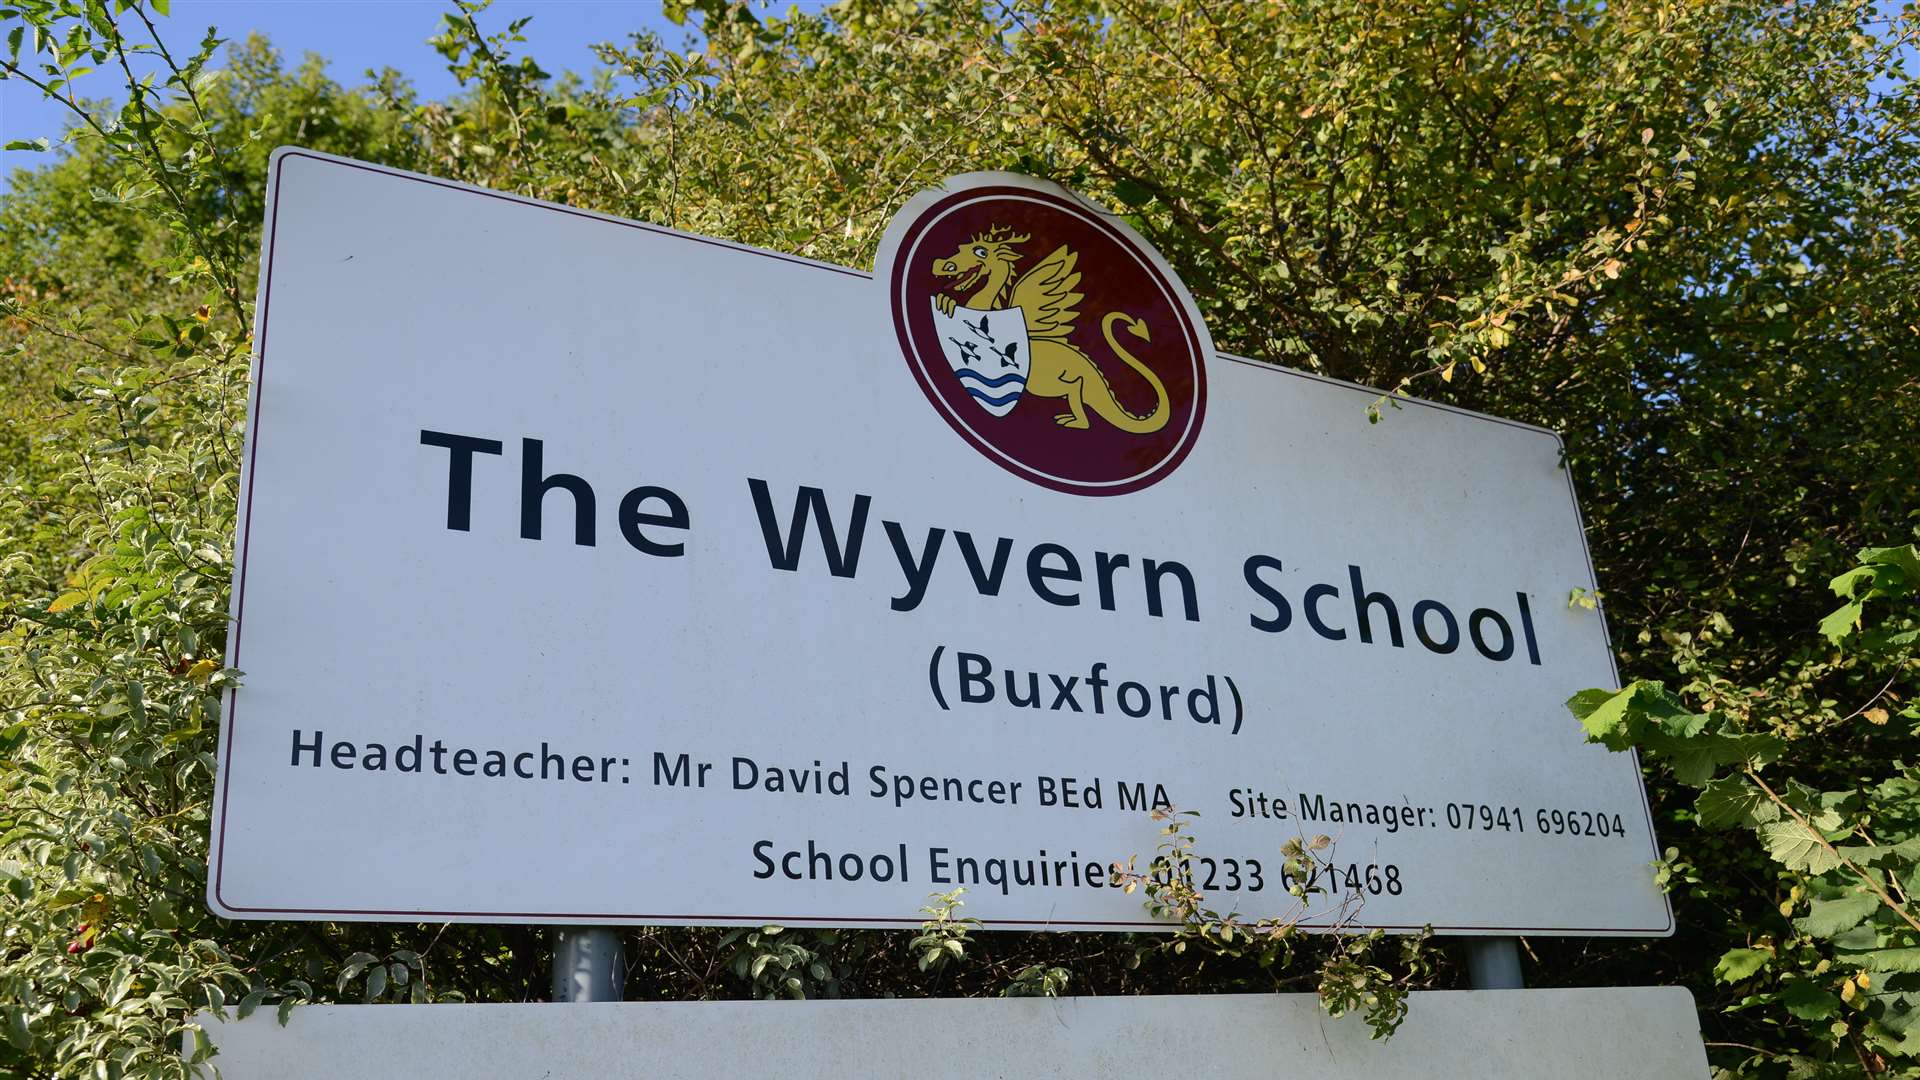 The bike was stolen from the Wyvern School, Ashford. Picture: Gary Browne